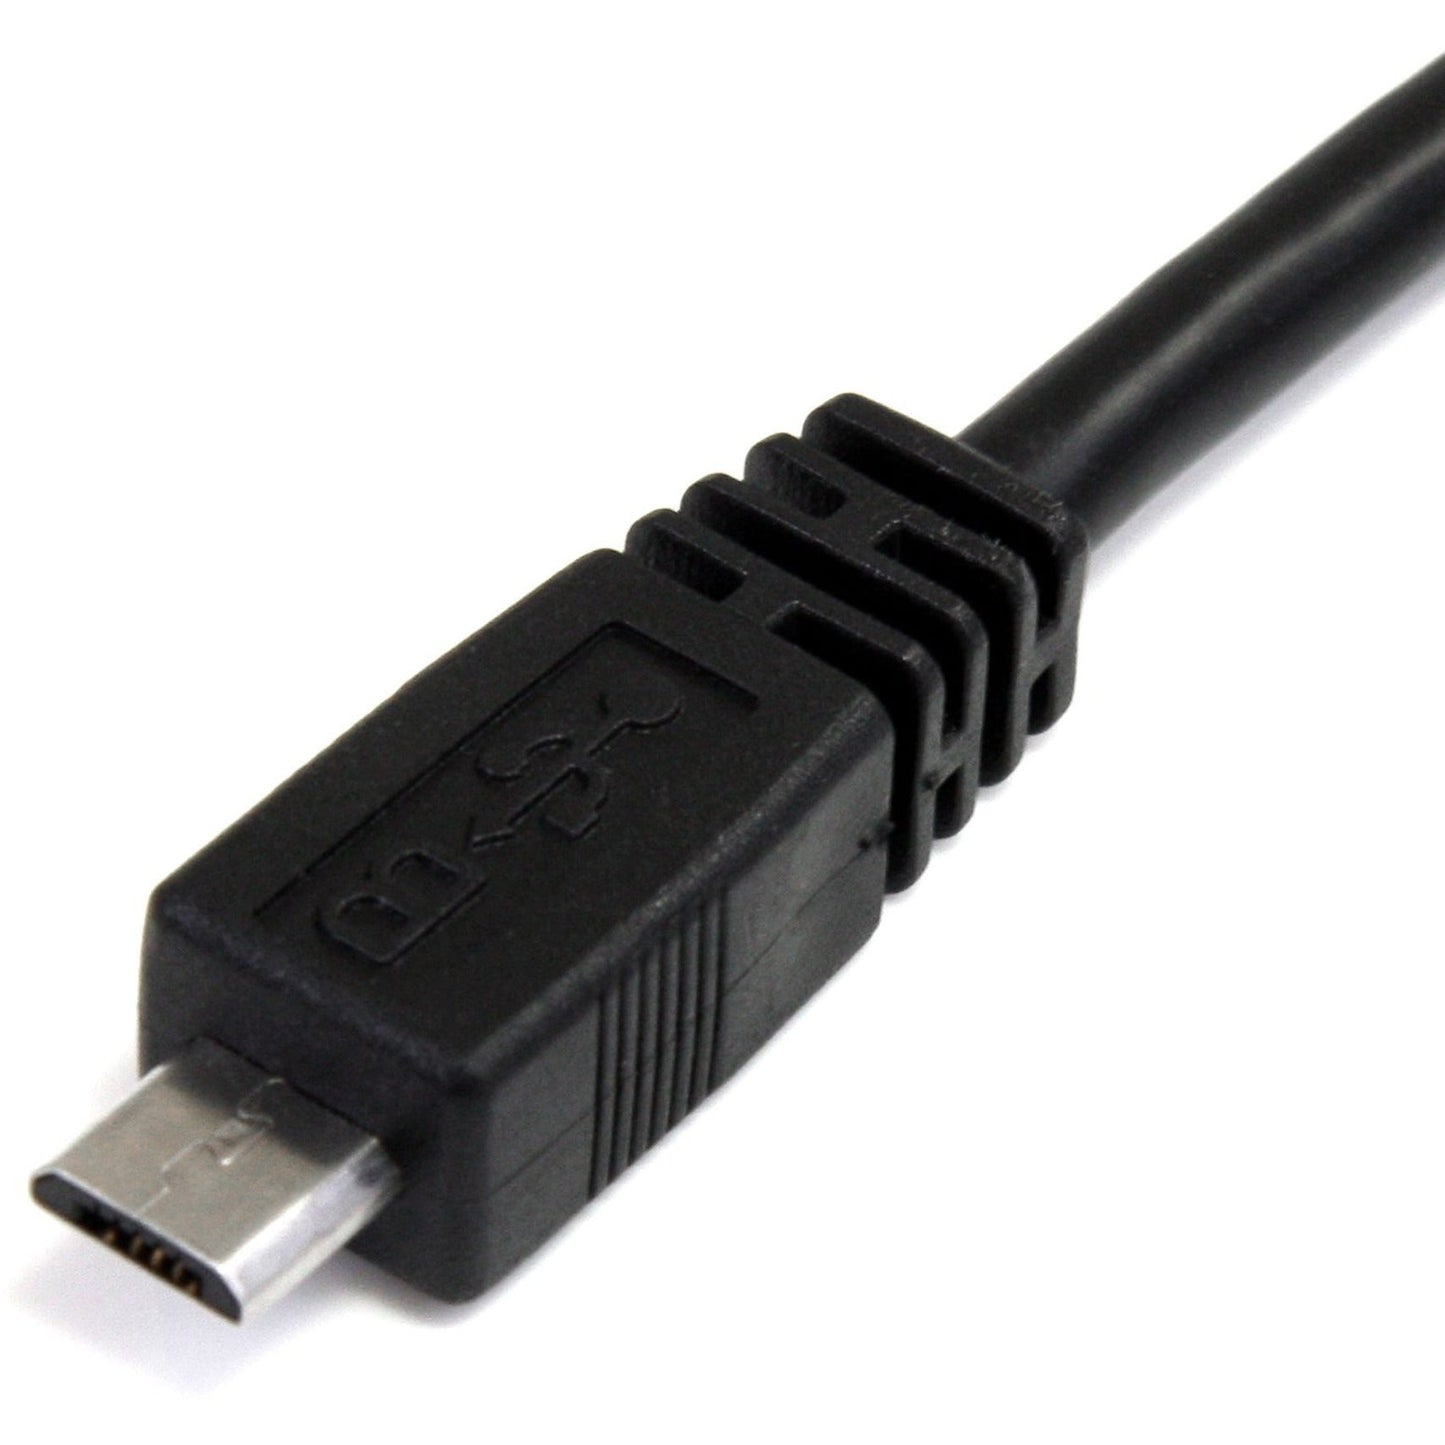 StarTech.com 1 ft USB Y Cable for External Hard Drive - Dual USB A to Micro B